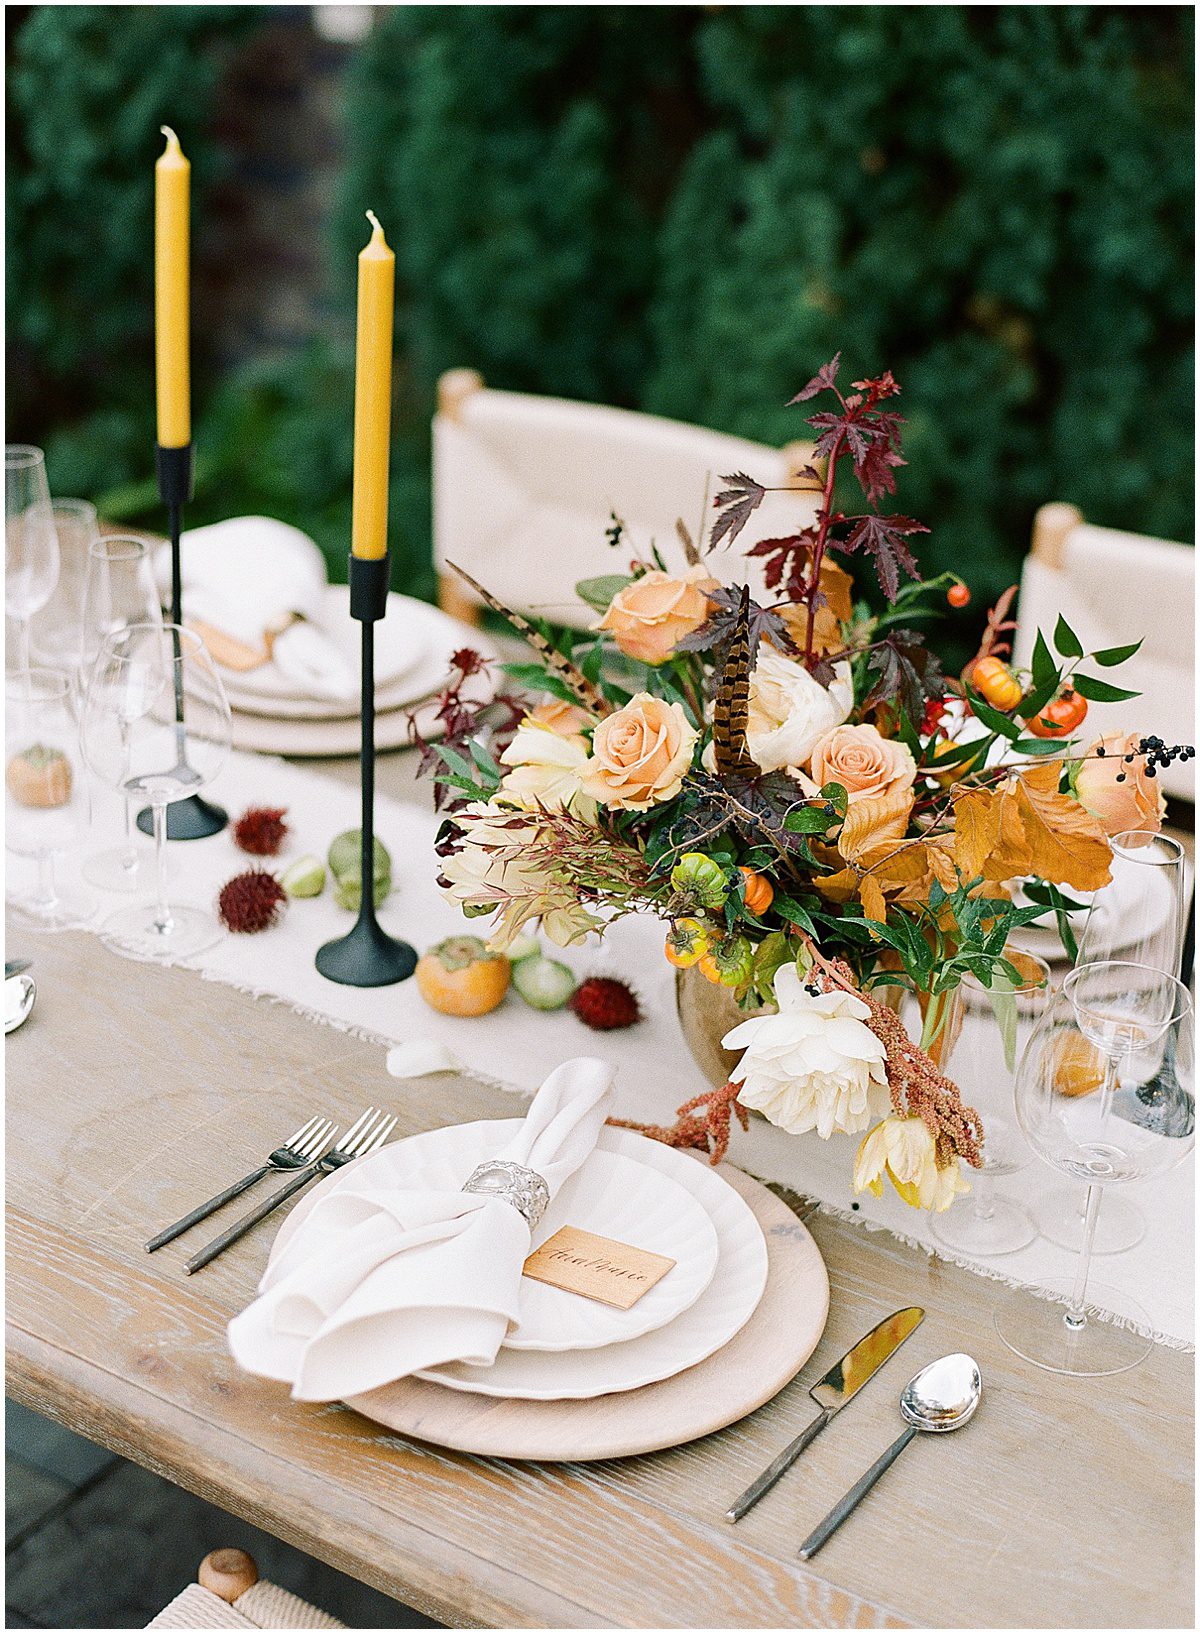 Wedding Reception Table with Flowers Photo